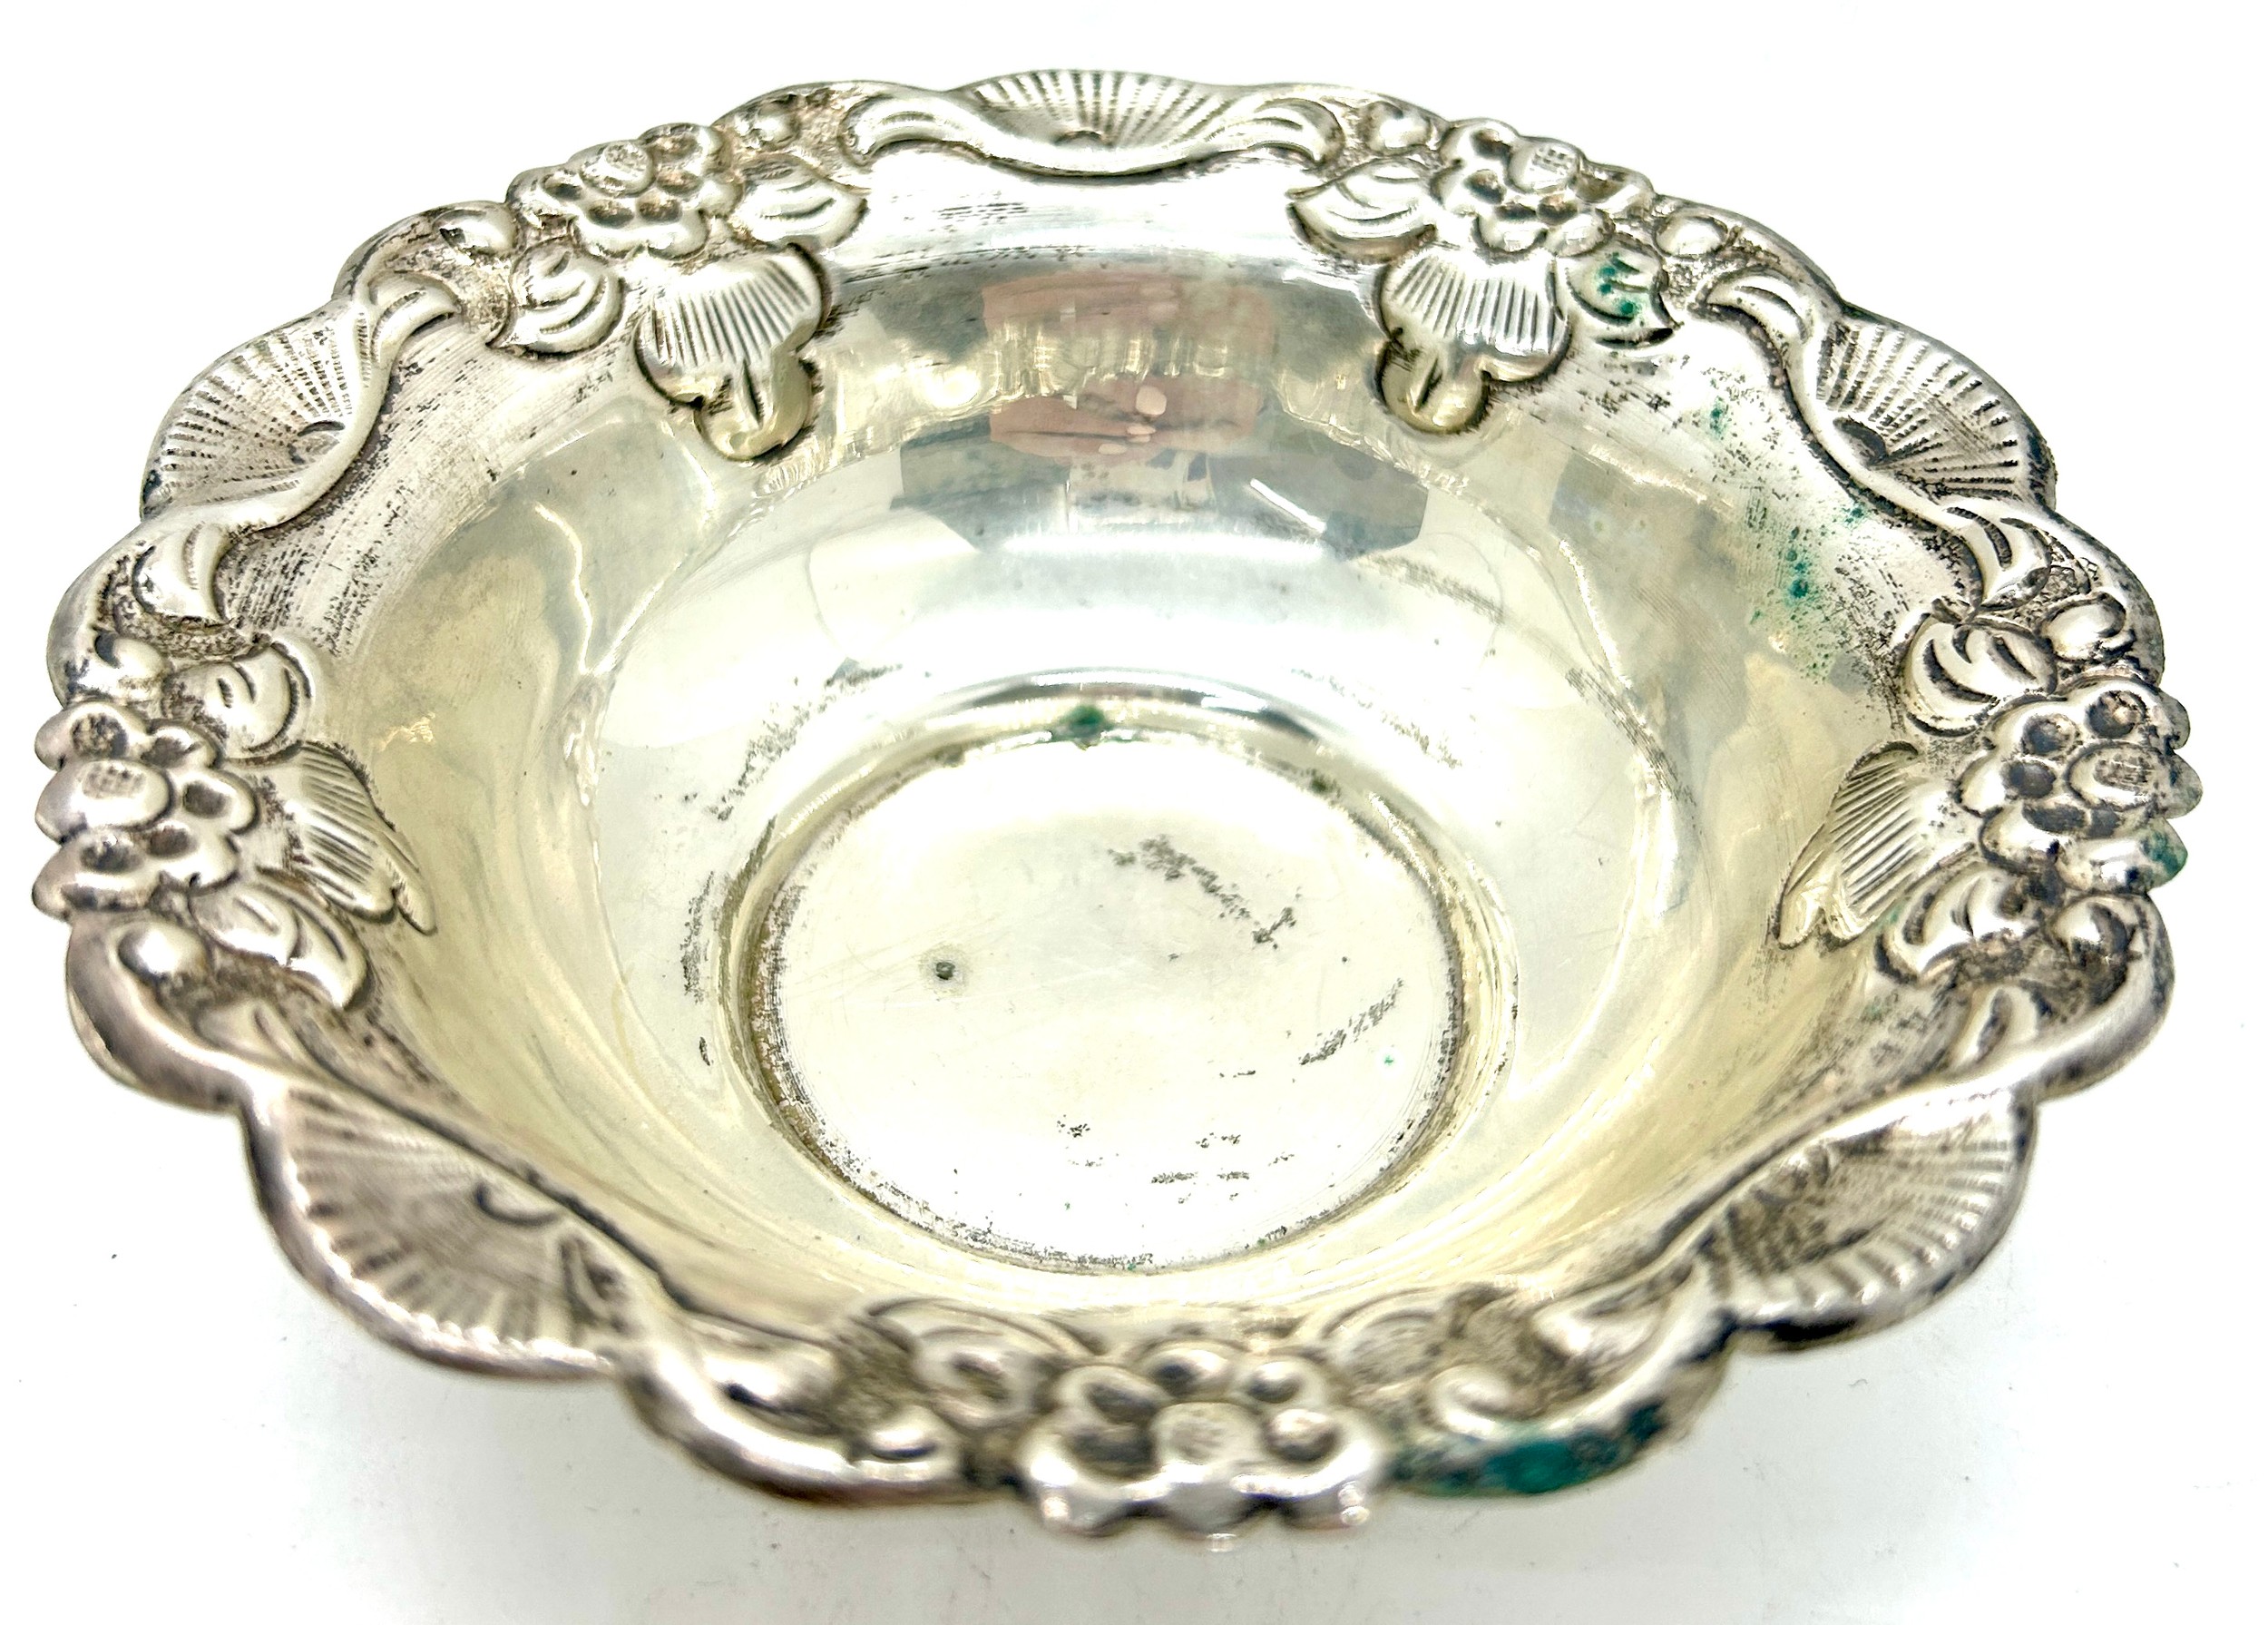 Pair continental silver trinkets / dishes, approximate height 3.5 inches, diameter 12.5 inches - Image 2 of 3